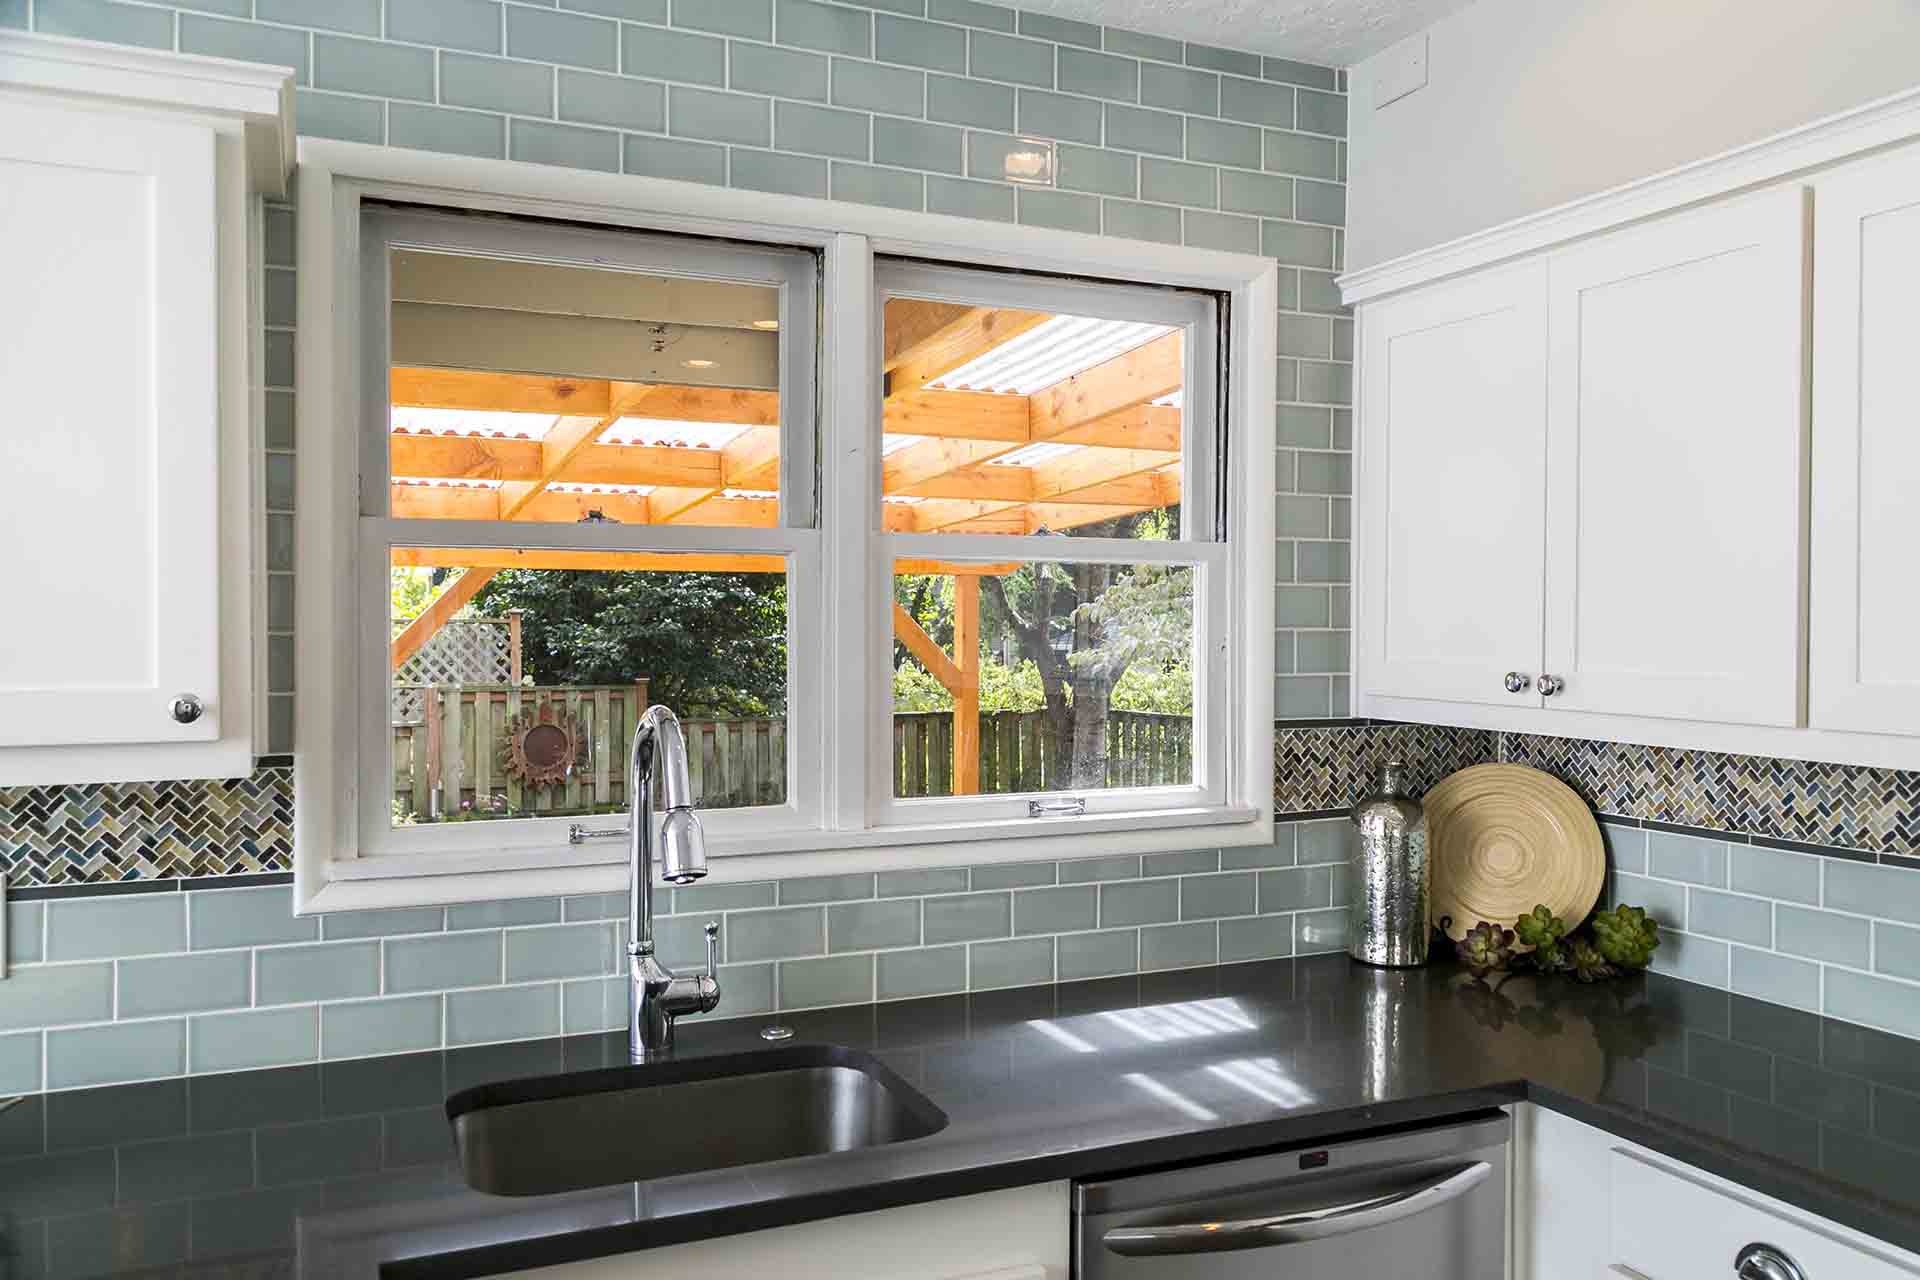 View of kitchen sink with big window